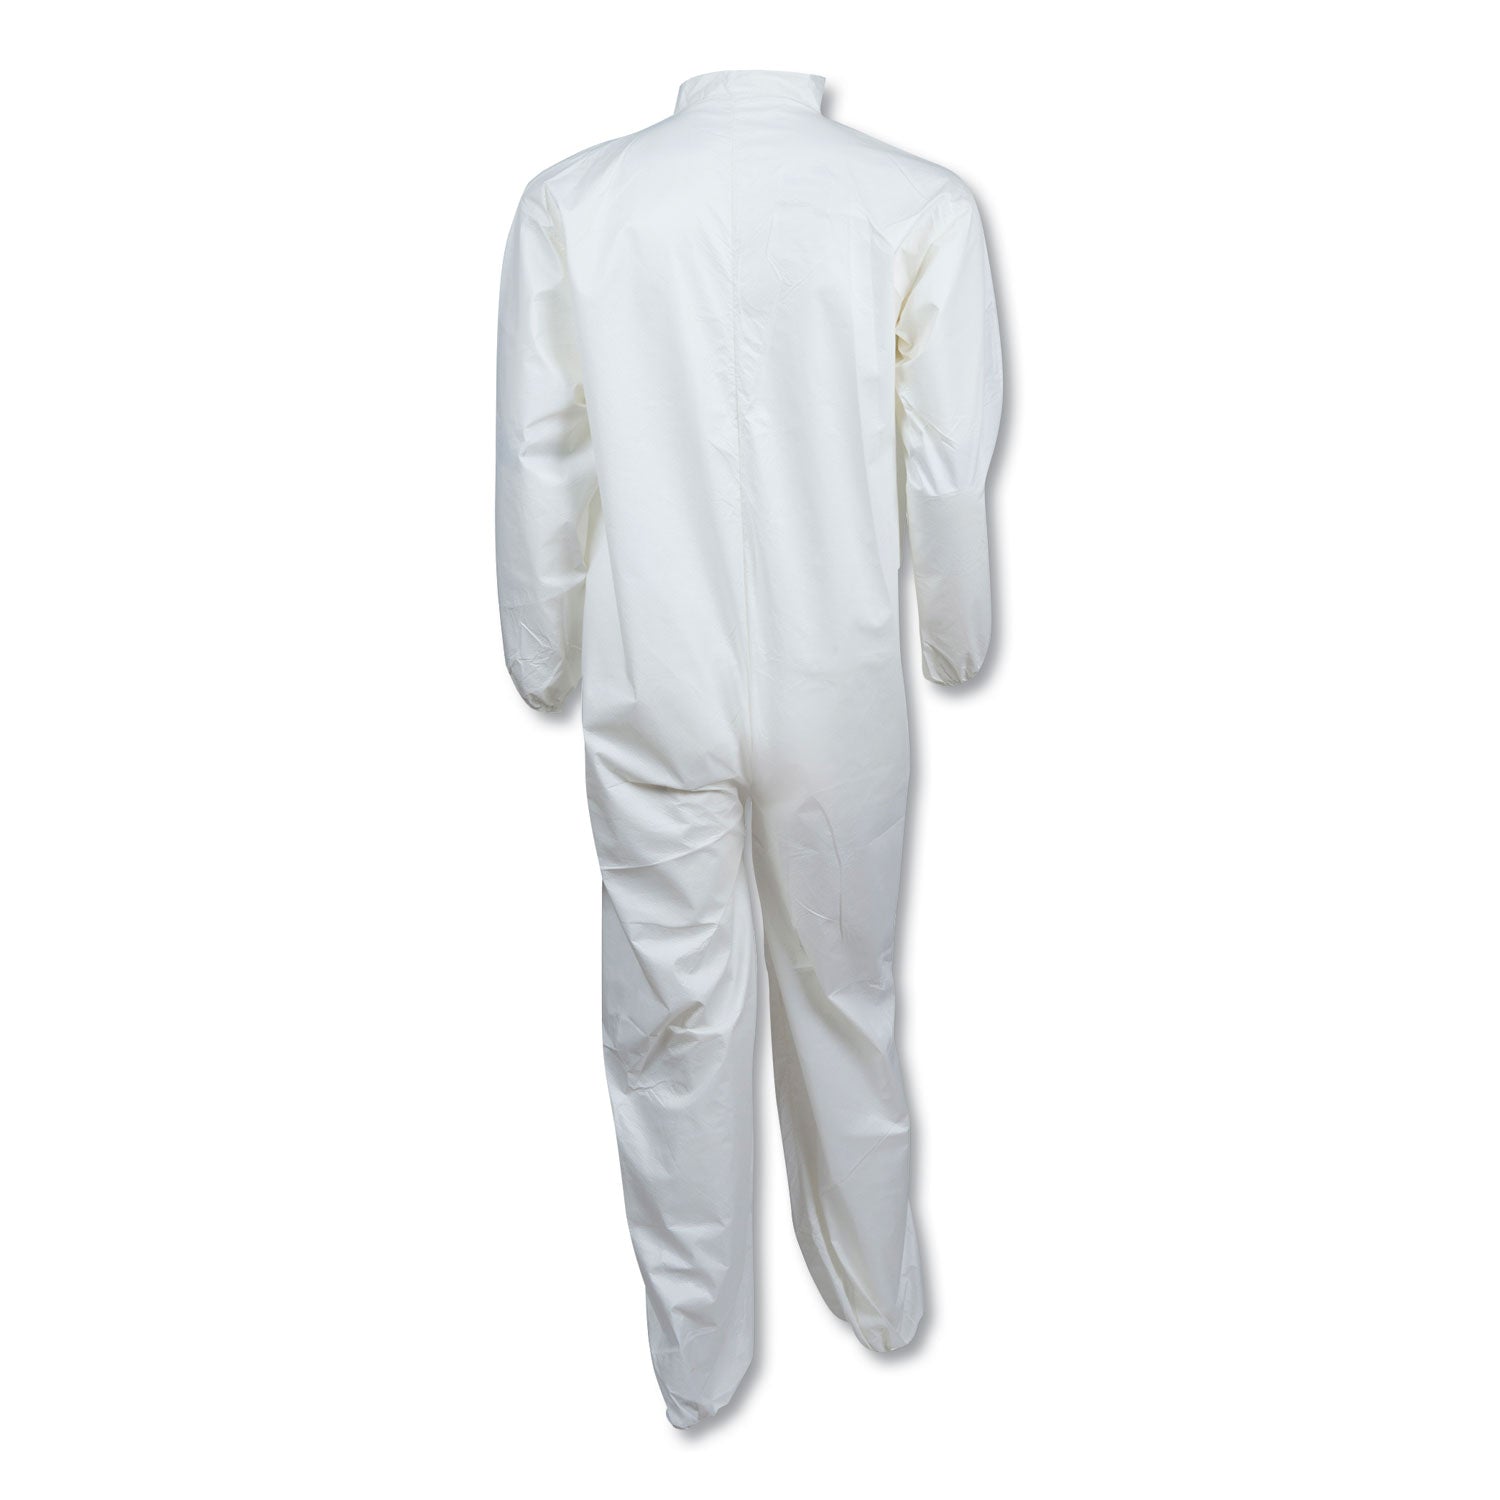 a40-elastic-cuff-and-ankles-coveralls-4x-large-white-25-carton_kcc44317 - 4